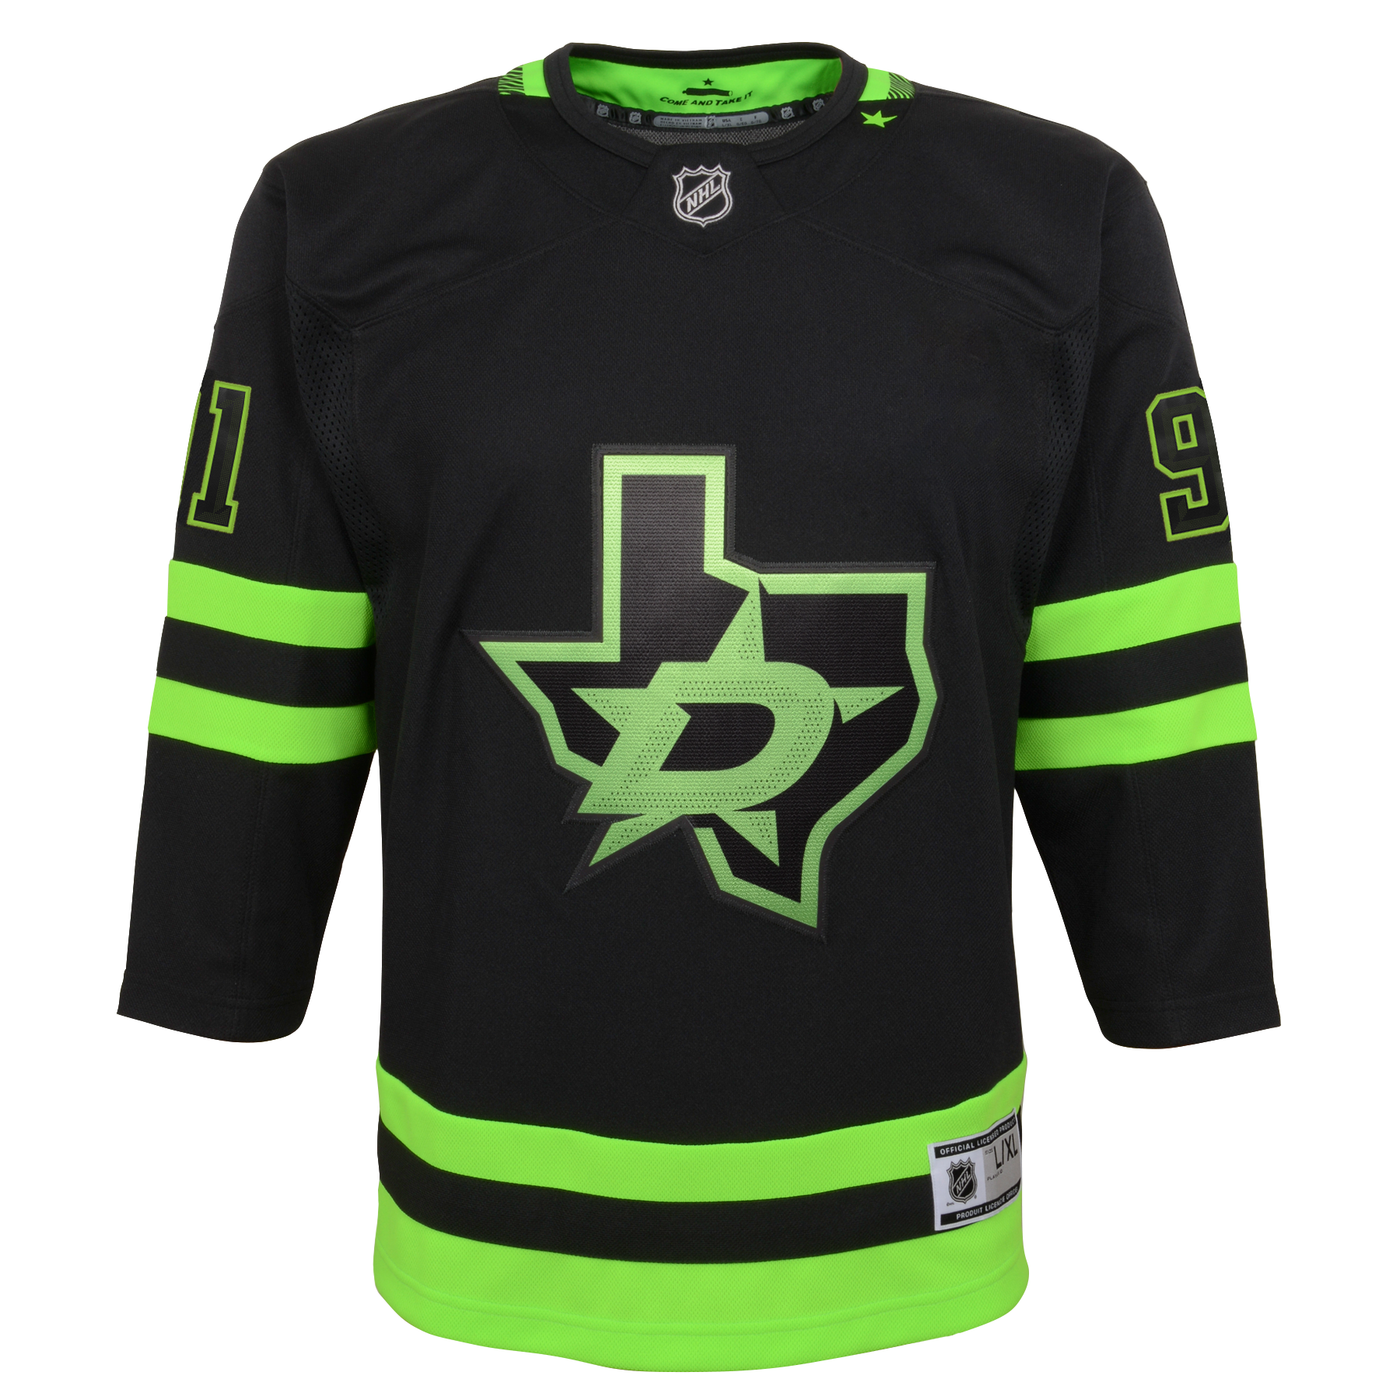 DALLAS STARS OUTERSTUFF YOUTH BLACKOUT TYLER SEGUIN 3RD PREMIER JERSEY - FRONT VIEW